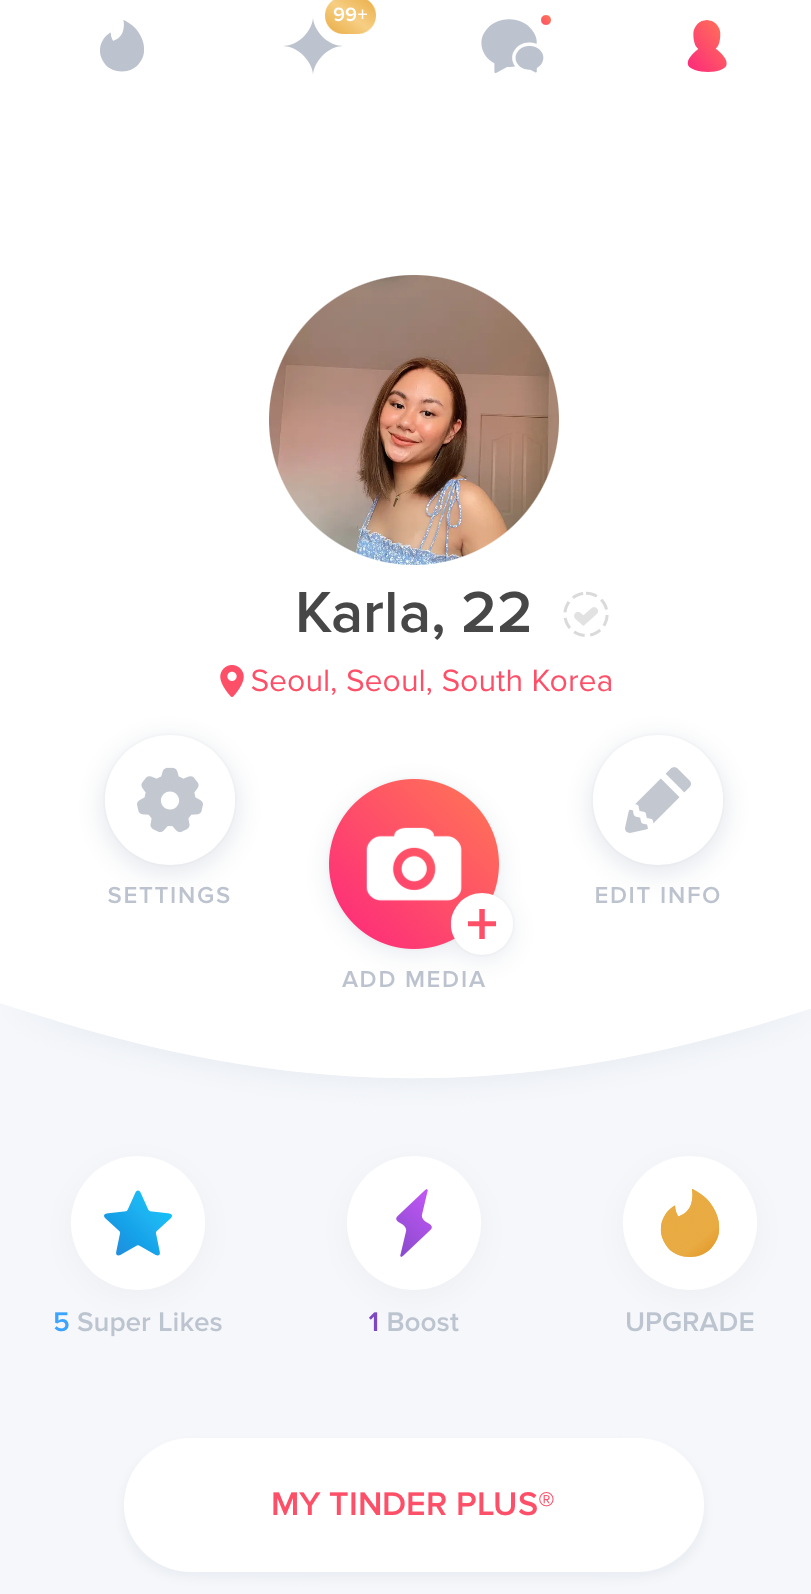 Tinder in Korea experience